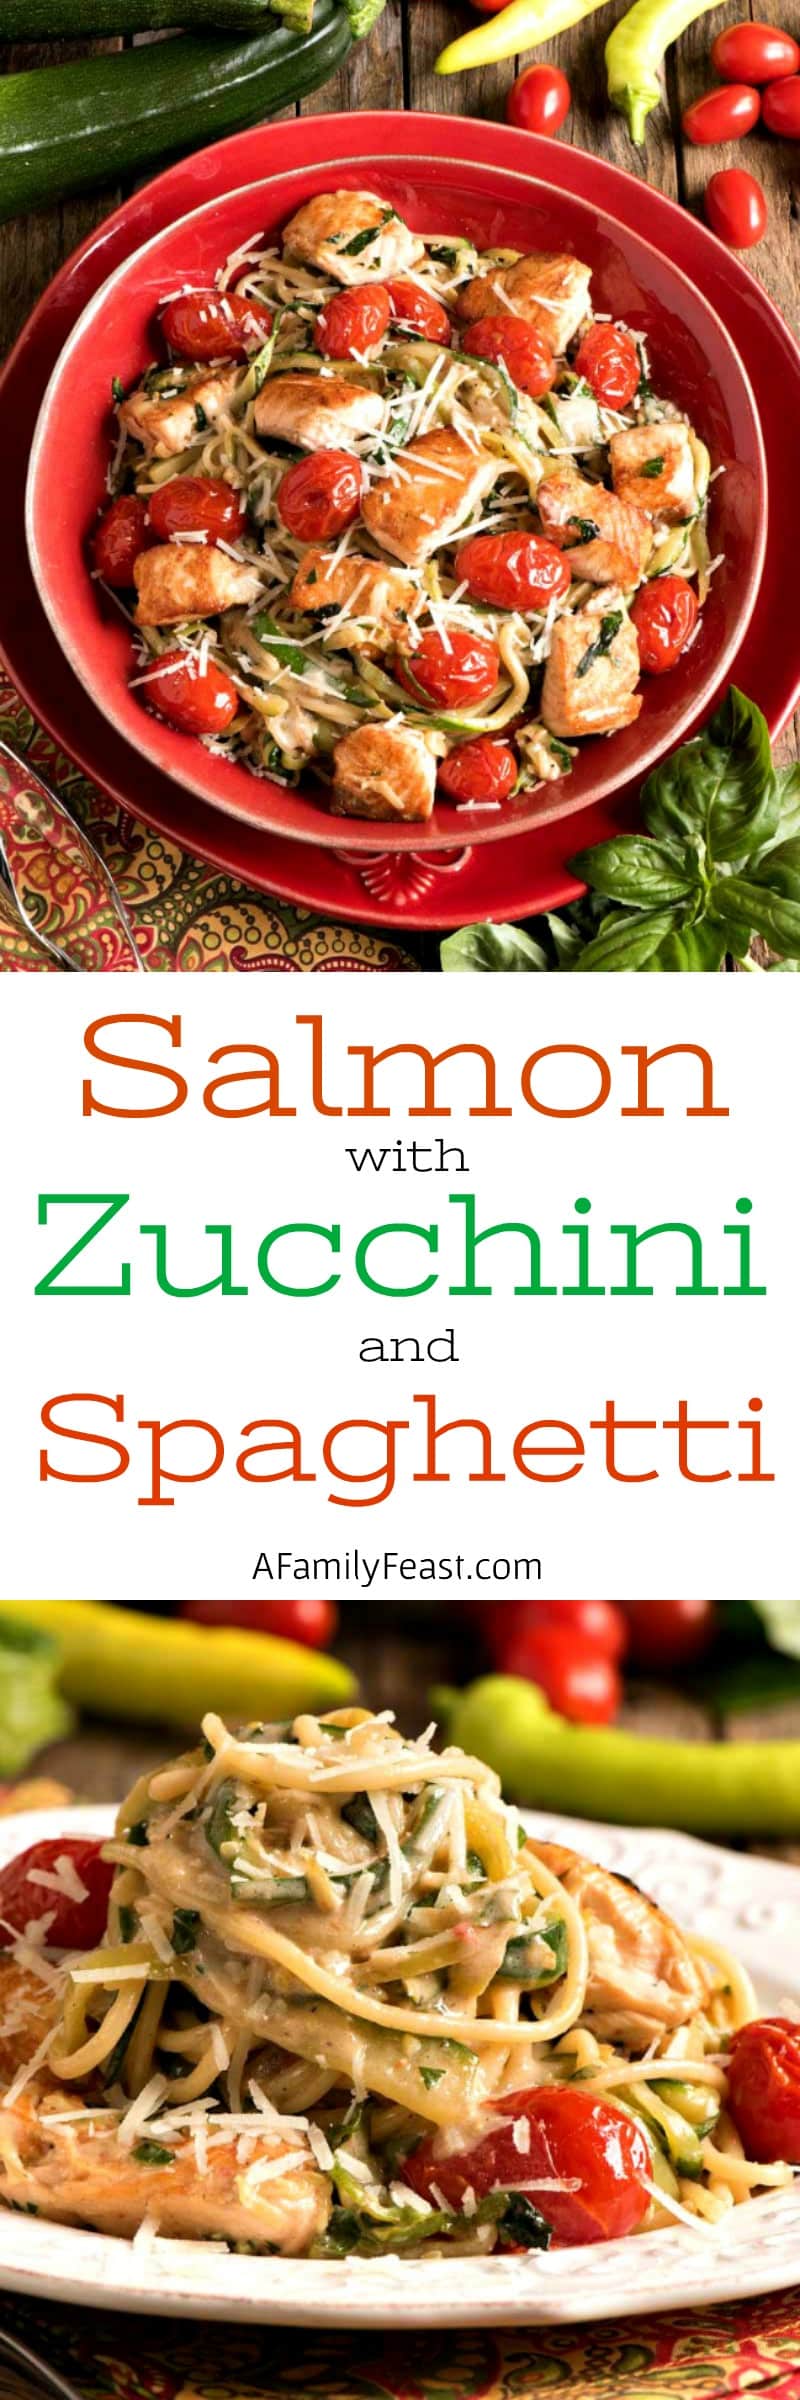 Salmon with Zucchini and Spaghetti - A Family Feast®